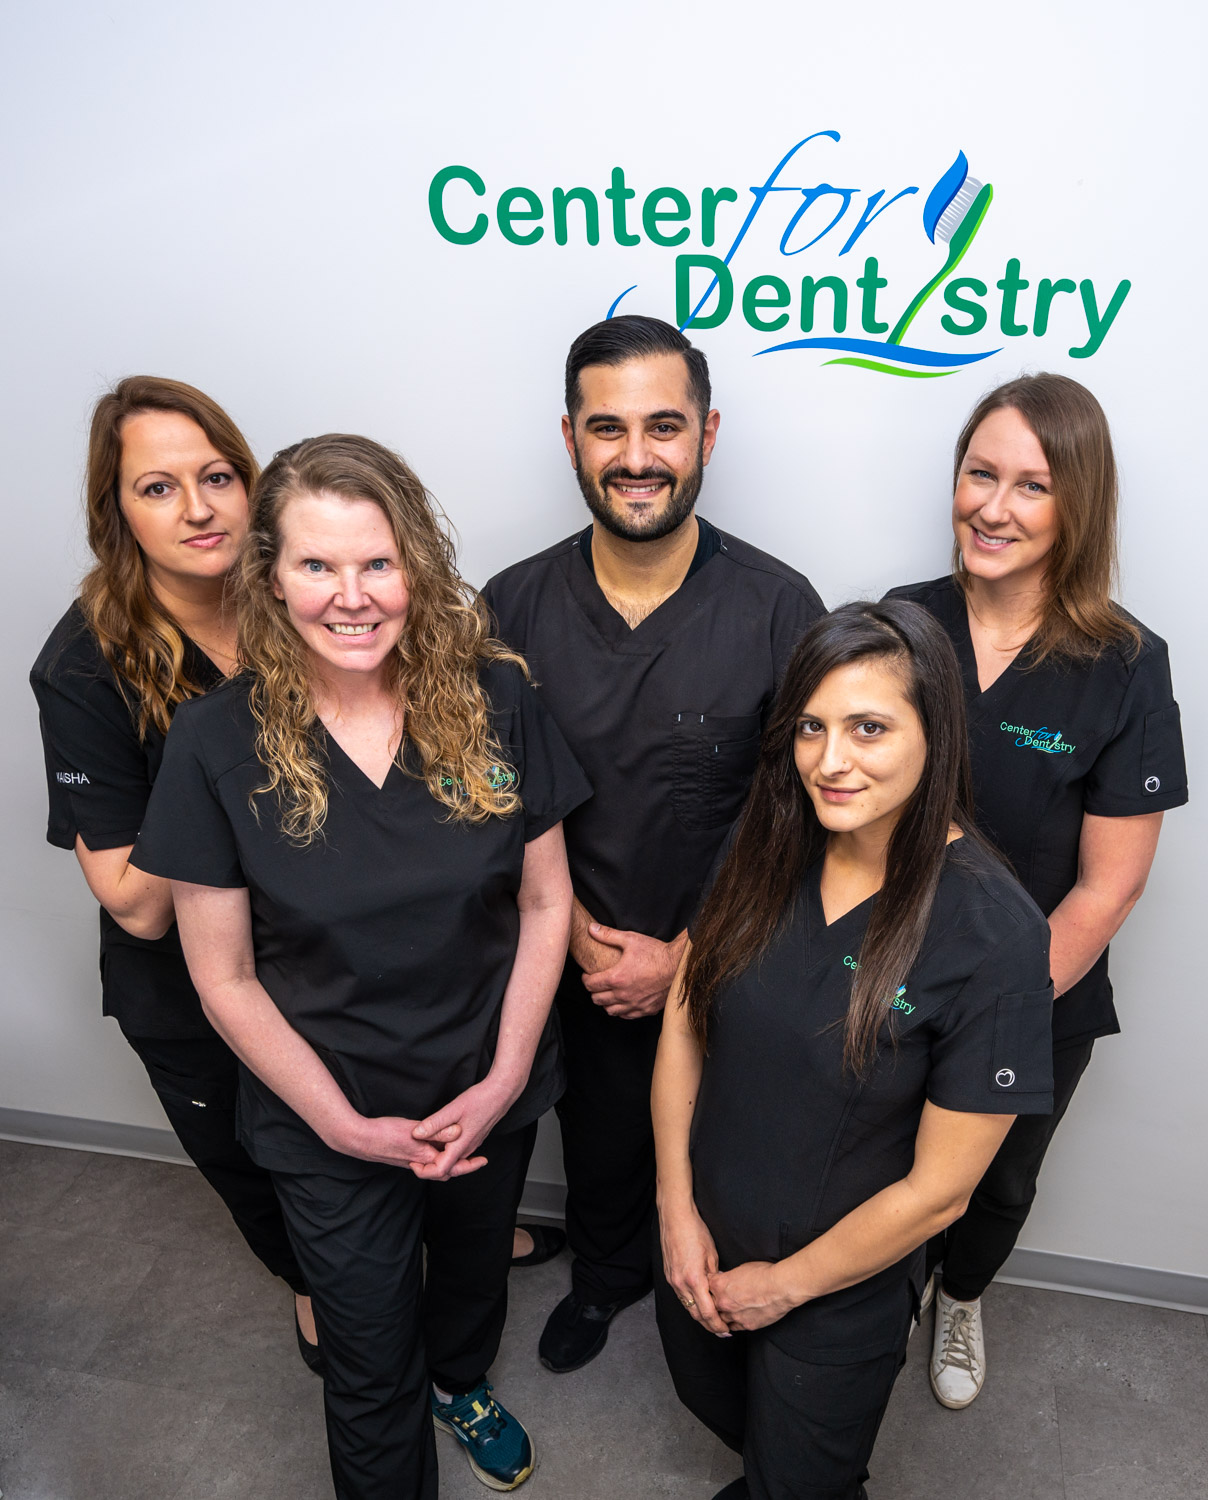 Image for Okanagan Falls Center for Dentistry is still welcoming new patients